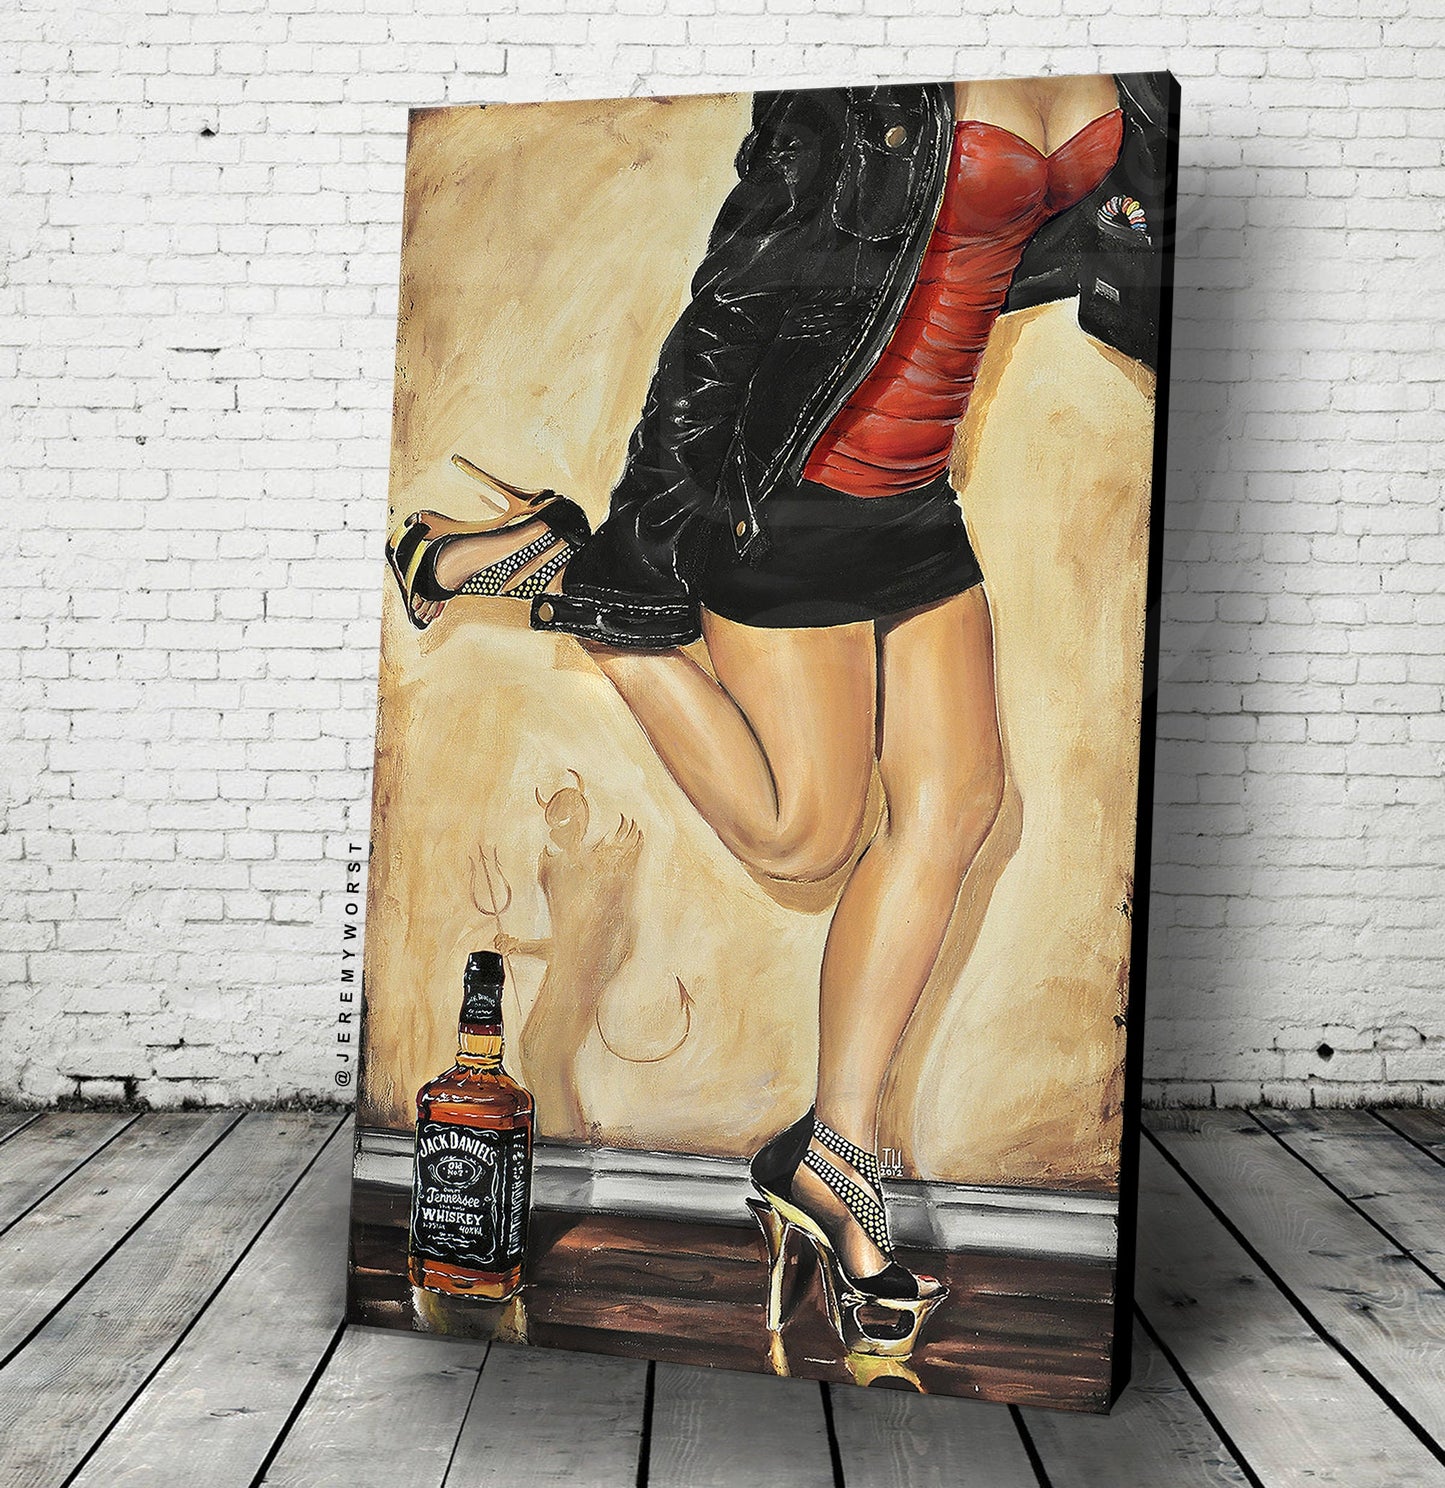 JEREMY WORST Dancing With the Devil 2 Jack daniels Original Artwork Signed Fine art Print poster  anime jewelry  alcohol